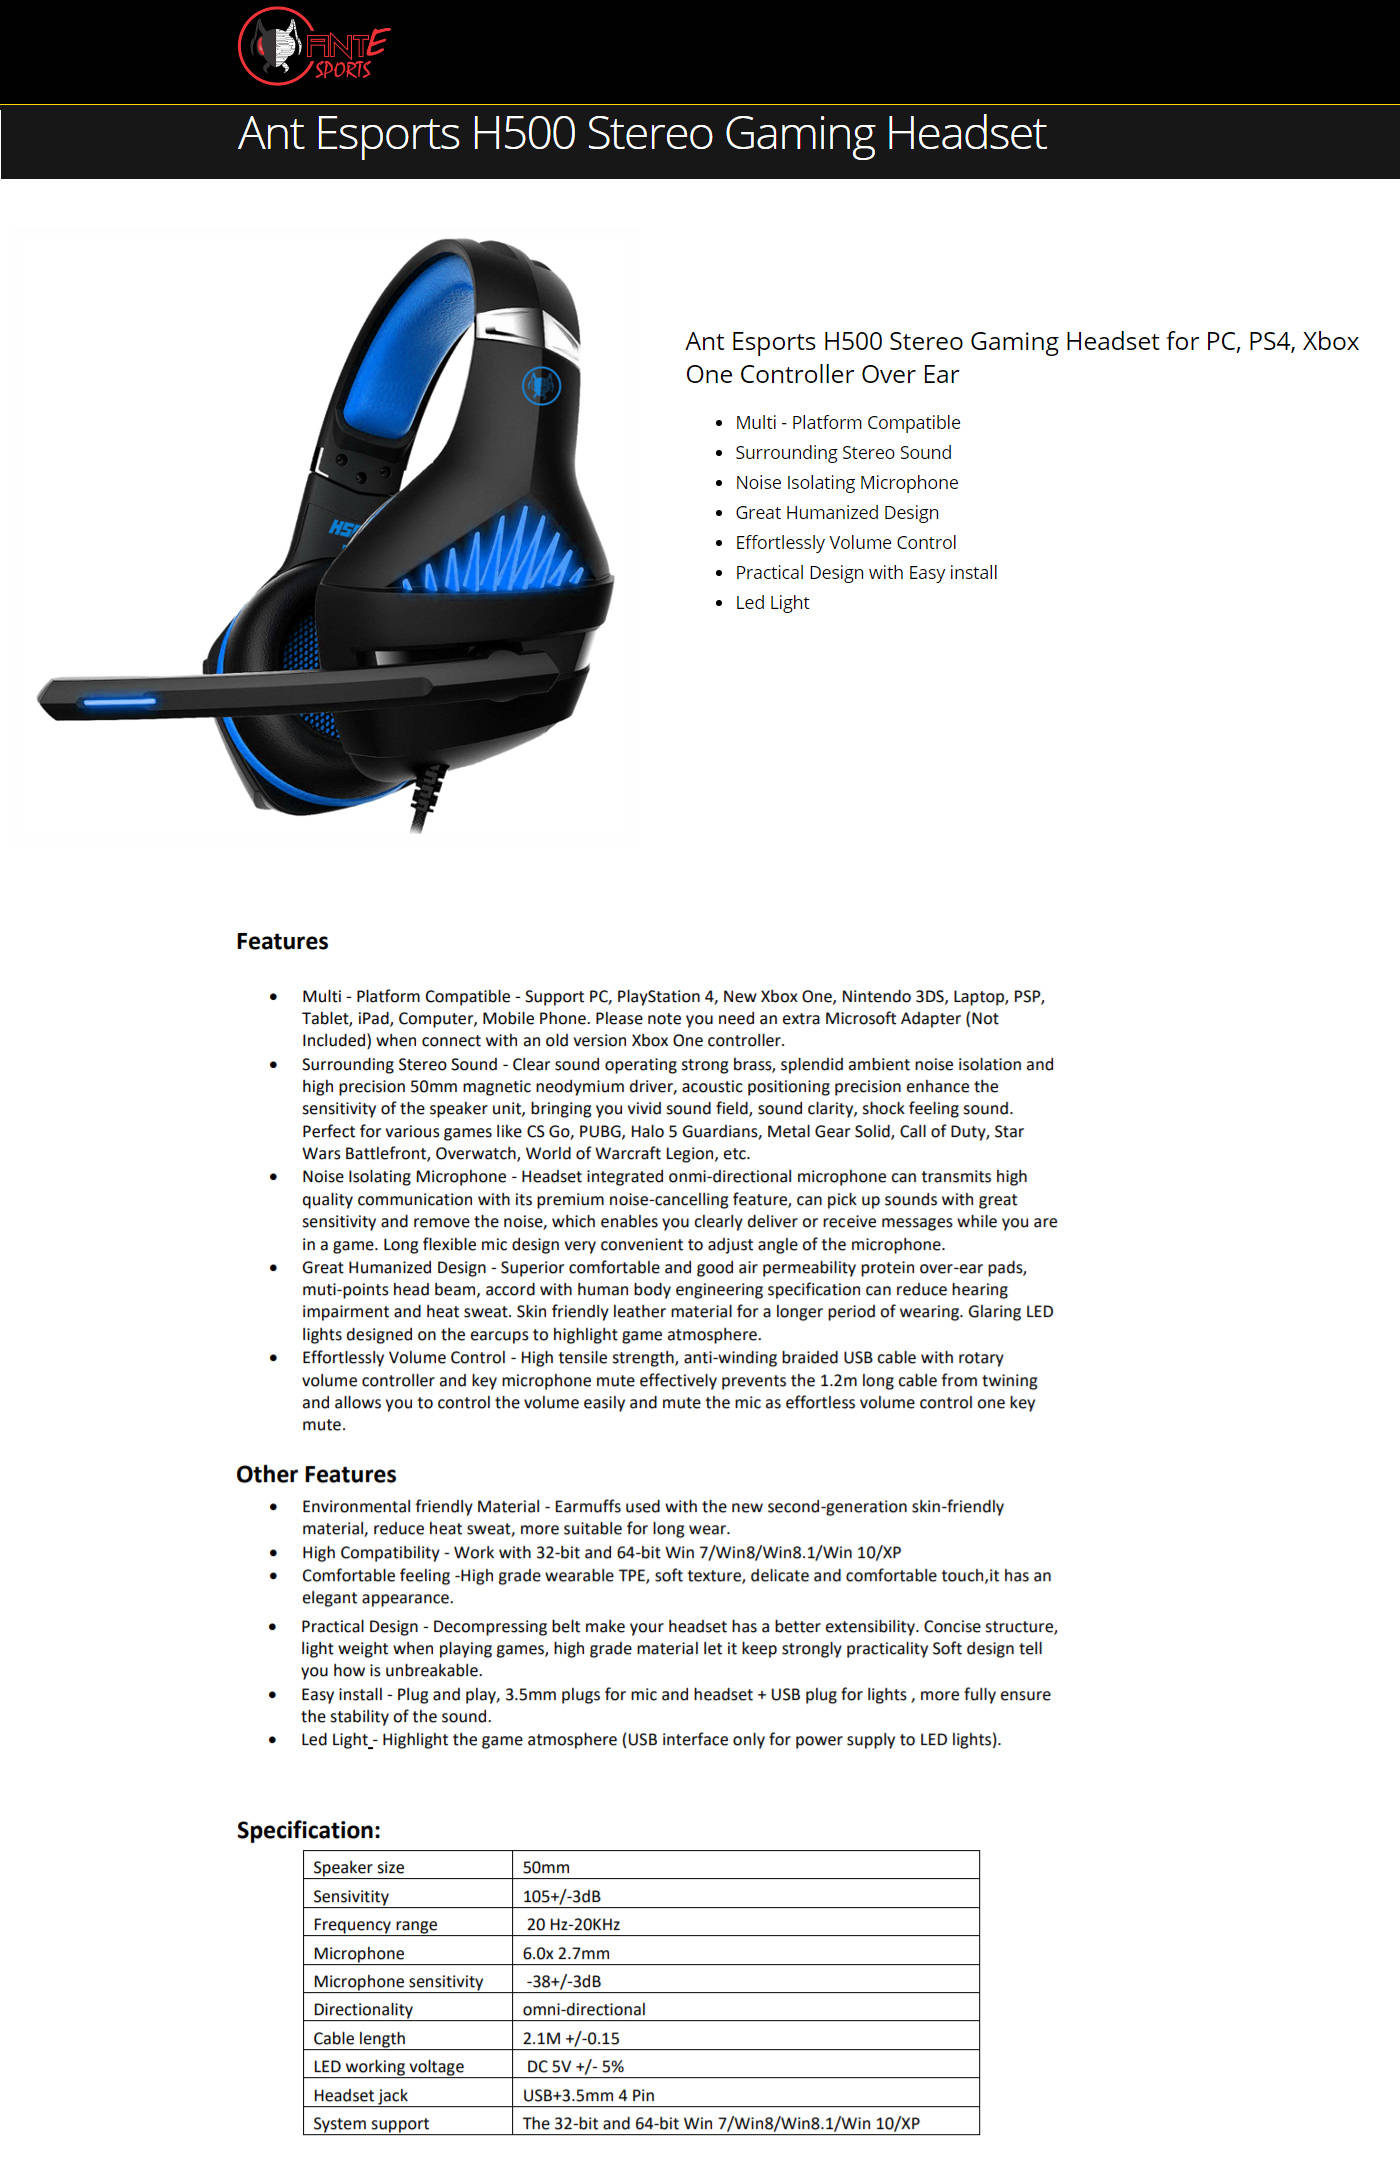  Buy Online AntEsports H500 Stereo Gaming Headset for PC (Black-Blue)